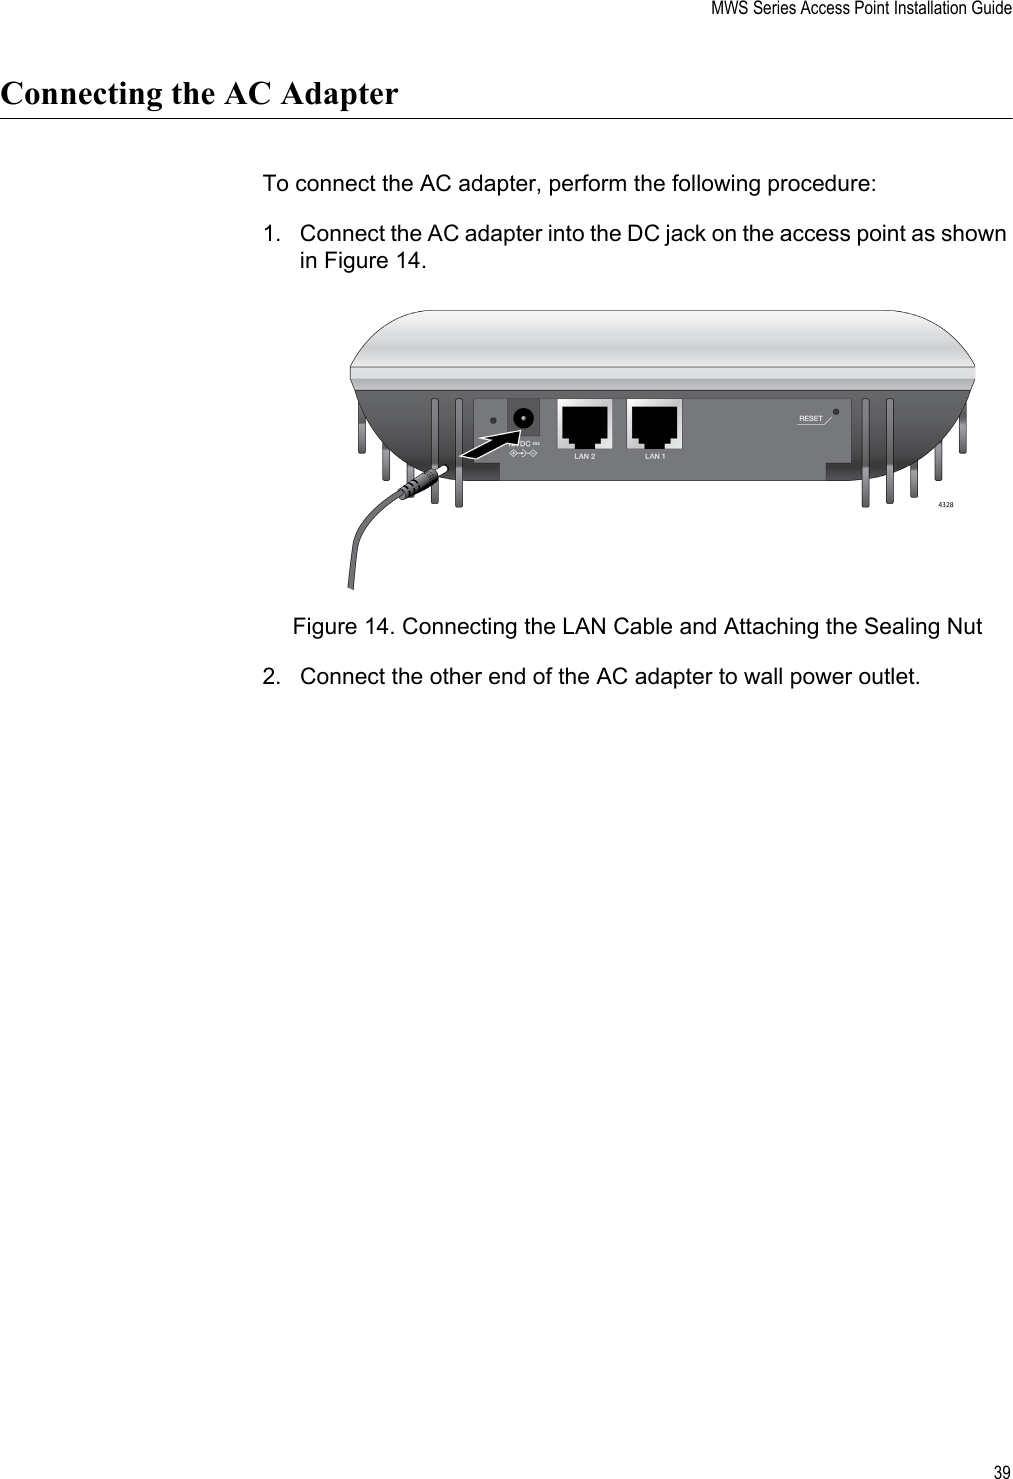 MWS Series Access Point Installation Guide39Connecting the AC AdapterTo connect the AC adapter, perform the following procedure:1. Connect the AC adapter into the DC jack on the access point as shown in Figure 14.Figure 14. Connecting the LAN Cable and Attaching the Sealing Nut2. Connect the other end of the AC adapter to wall power outlet. 